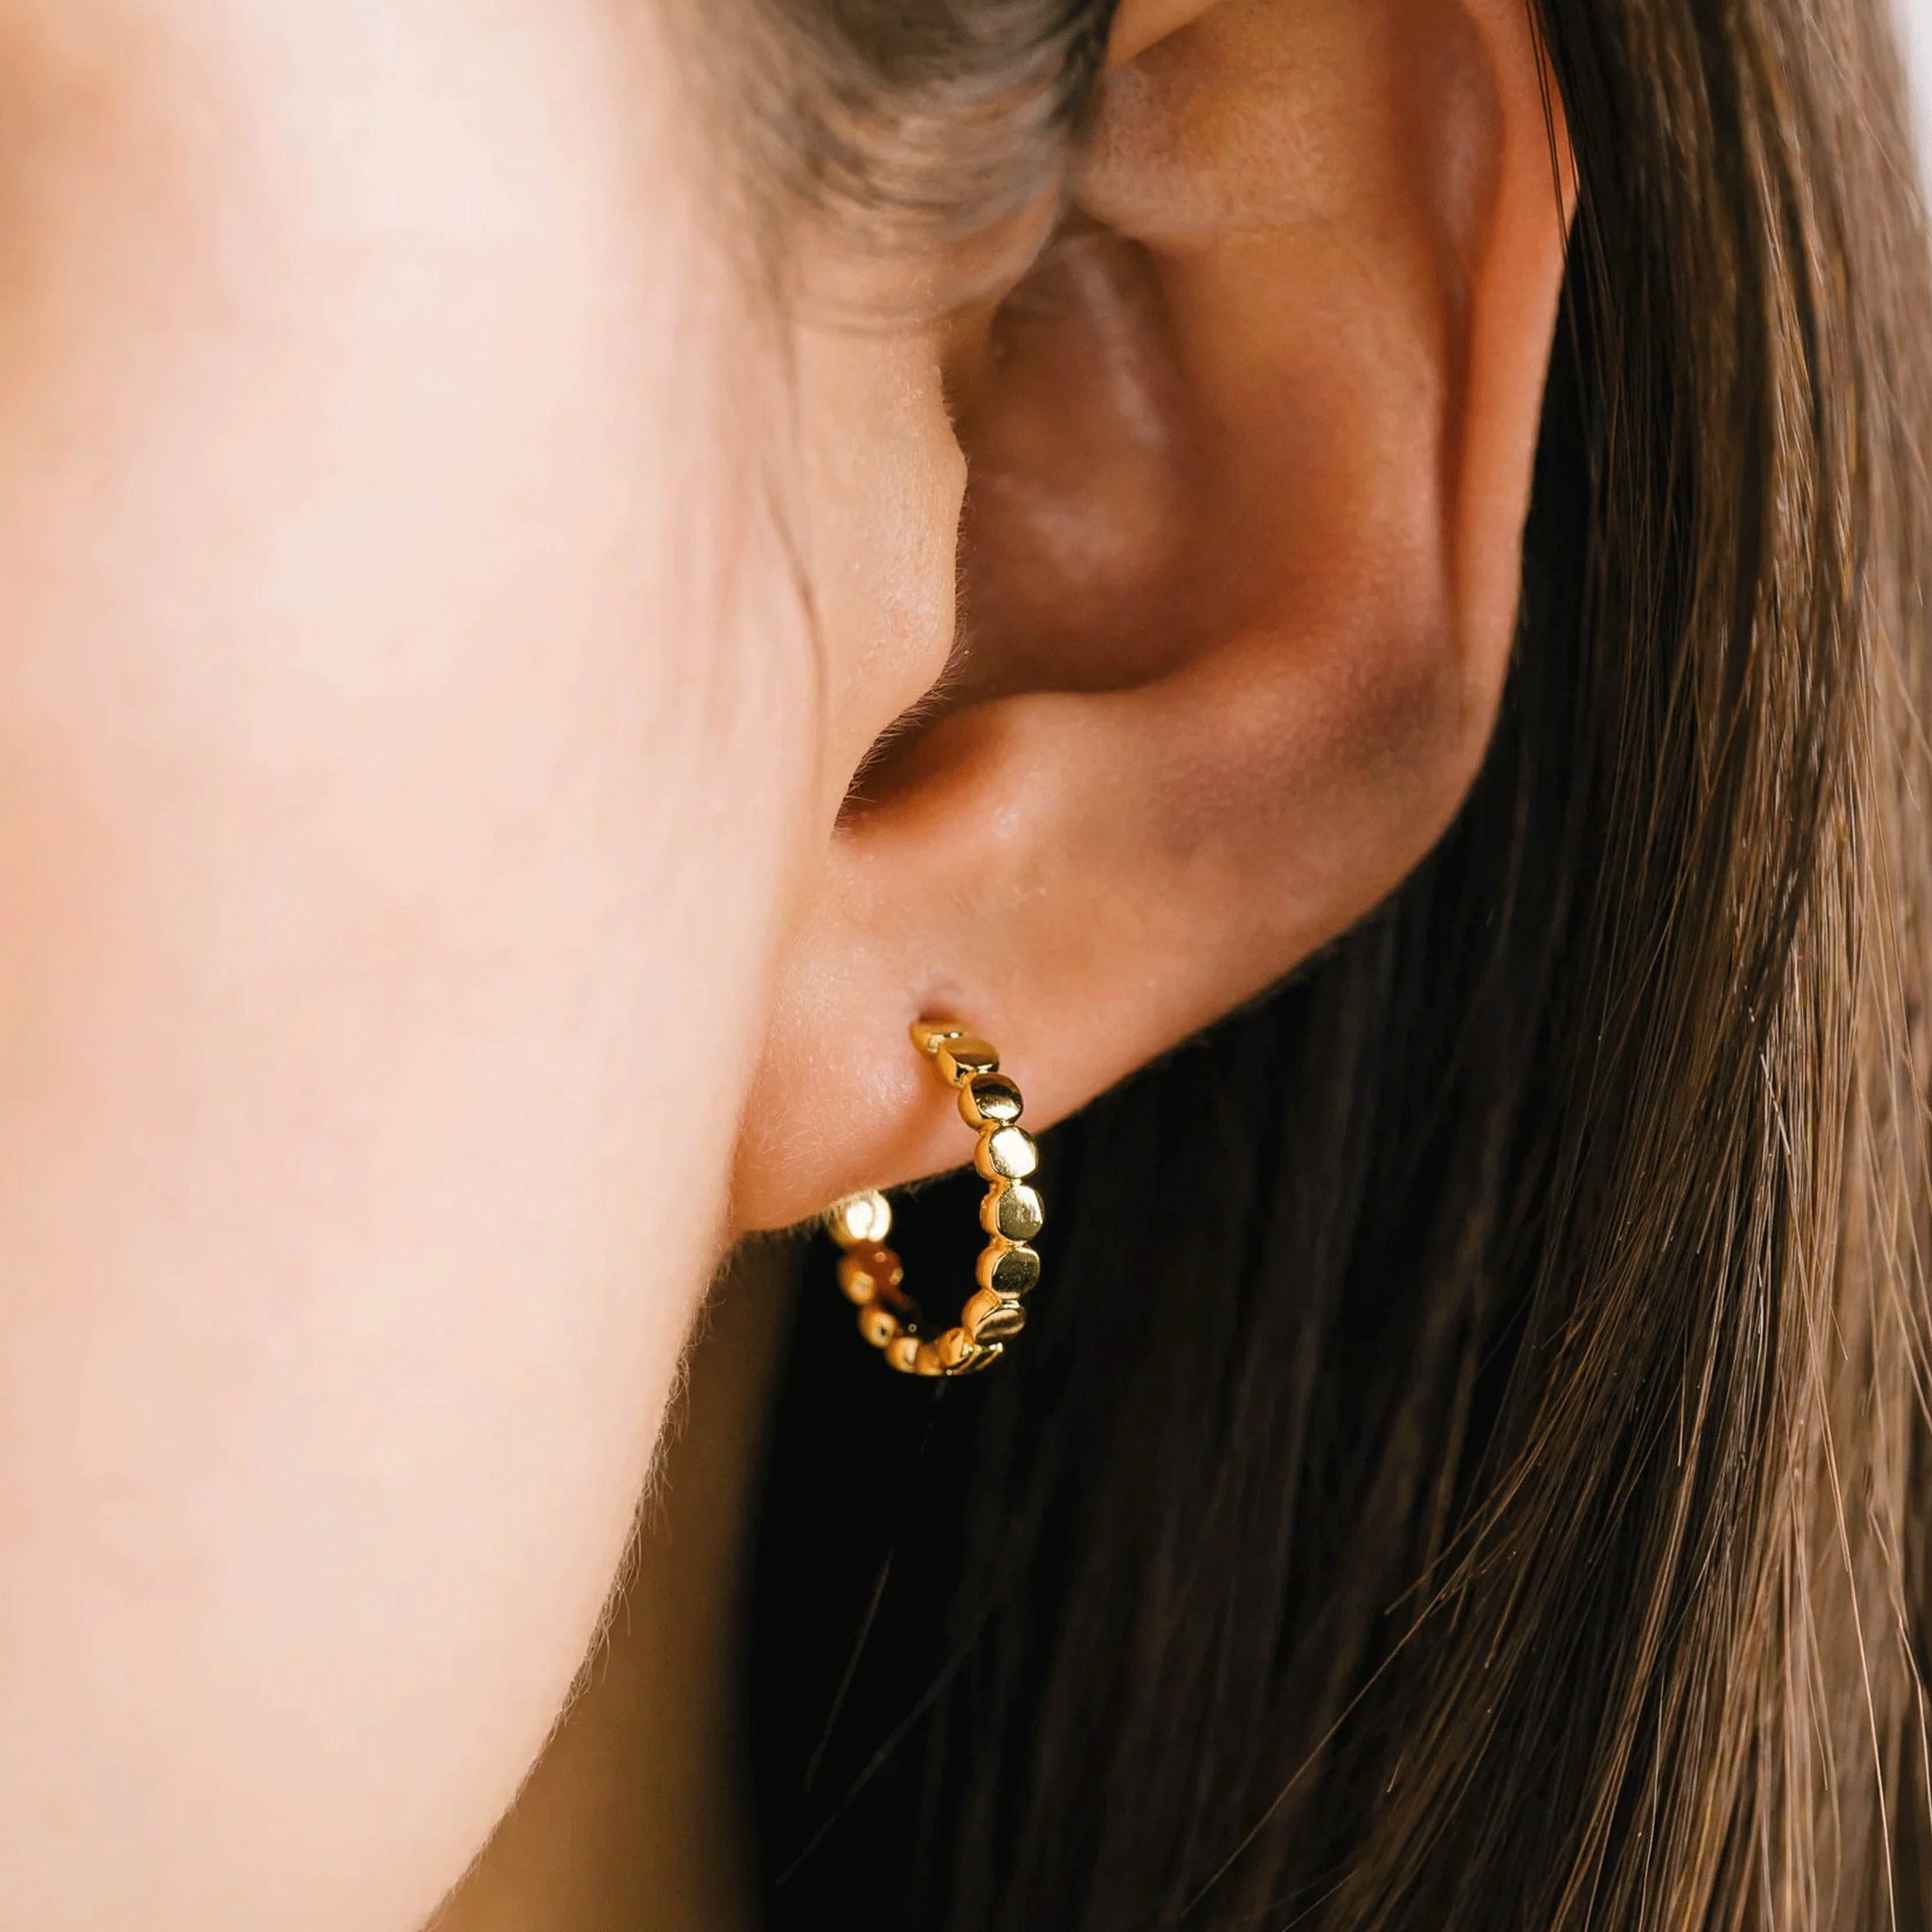 A model wearing a pair of gold hoop earrings with a dainty circle detailing on the hoops.